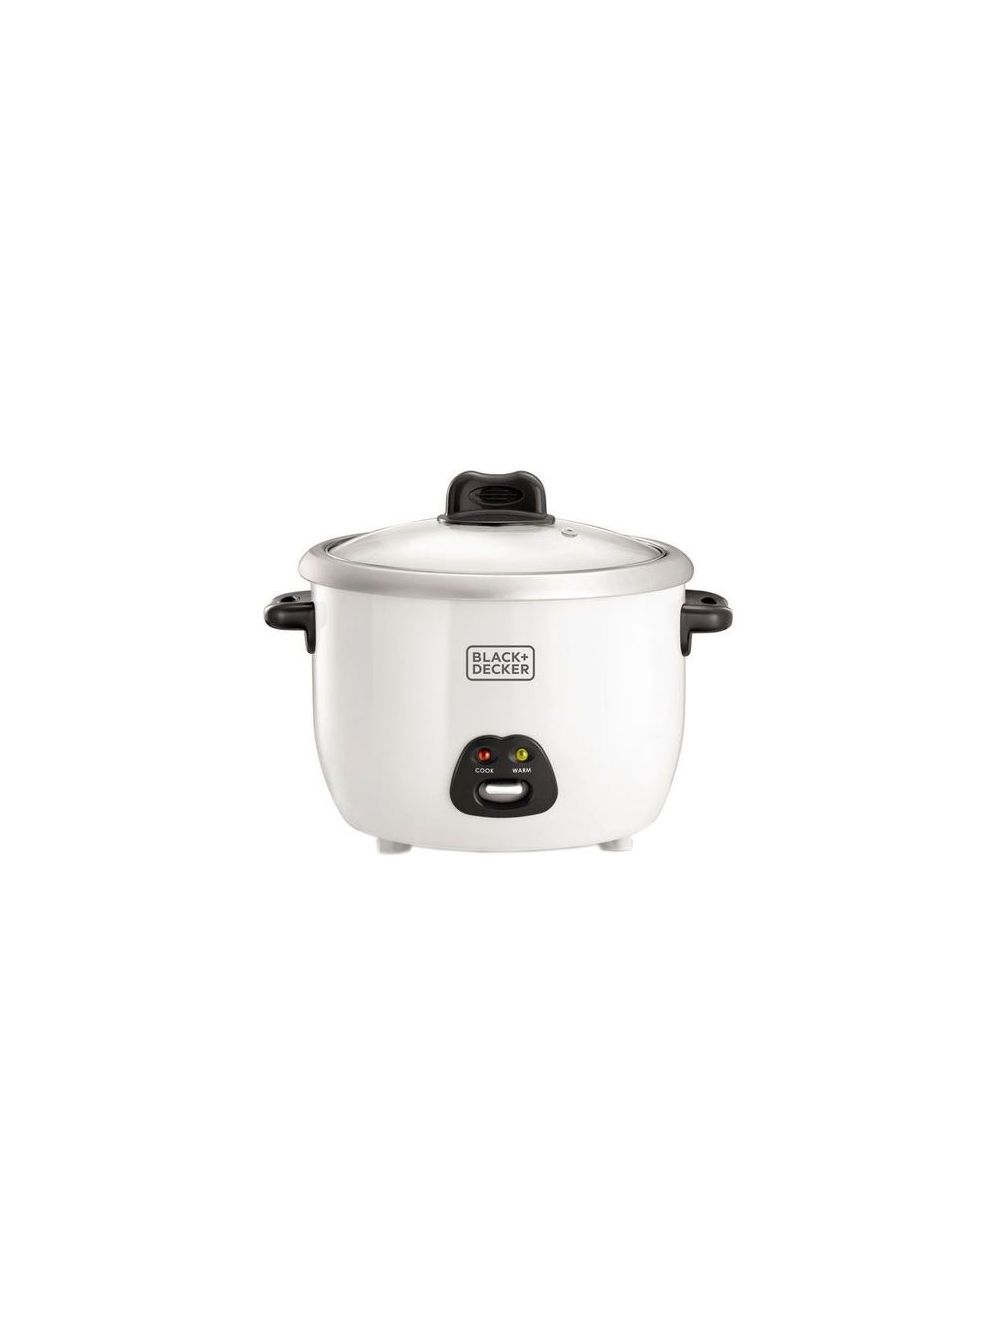 Black & Decker 1.8 Ltr. Rice Cooker with Glass Lid-RC1850-B5